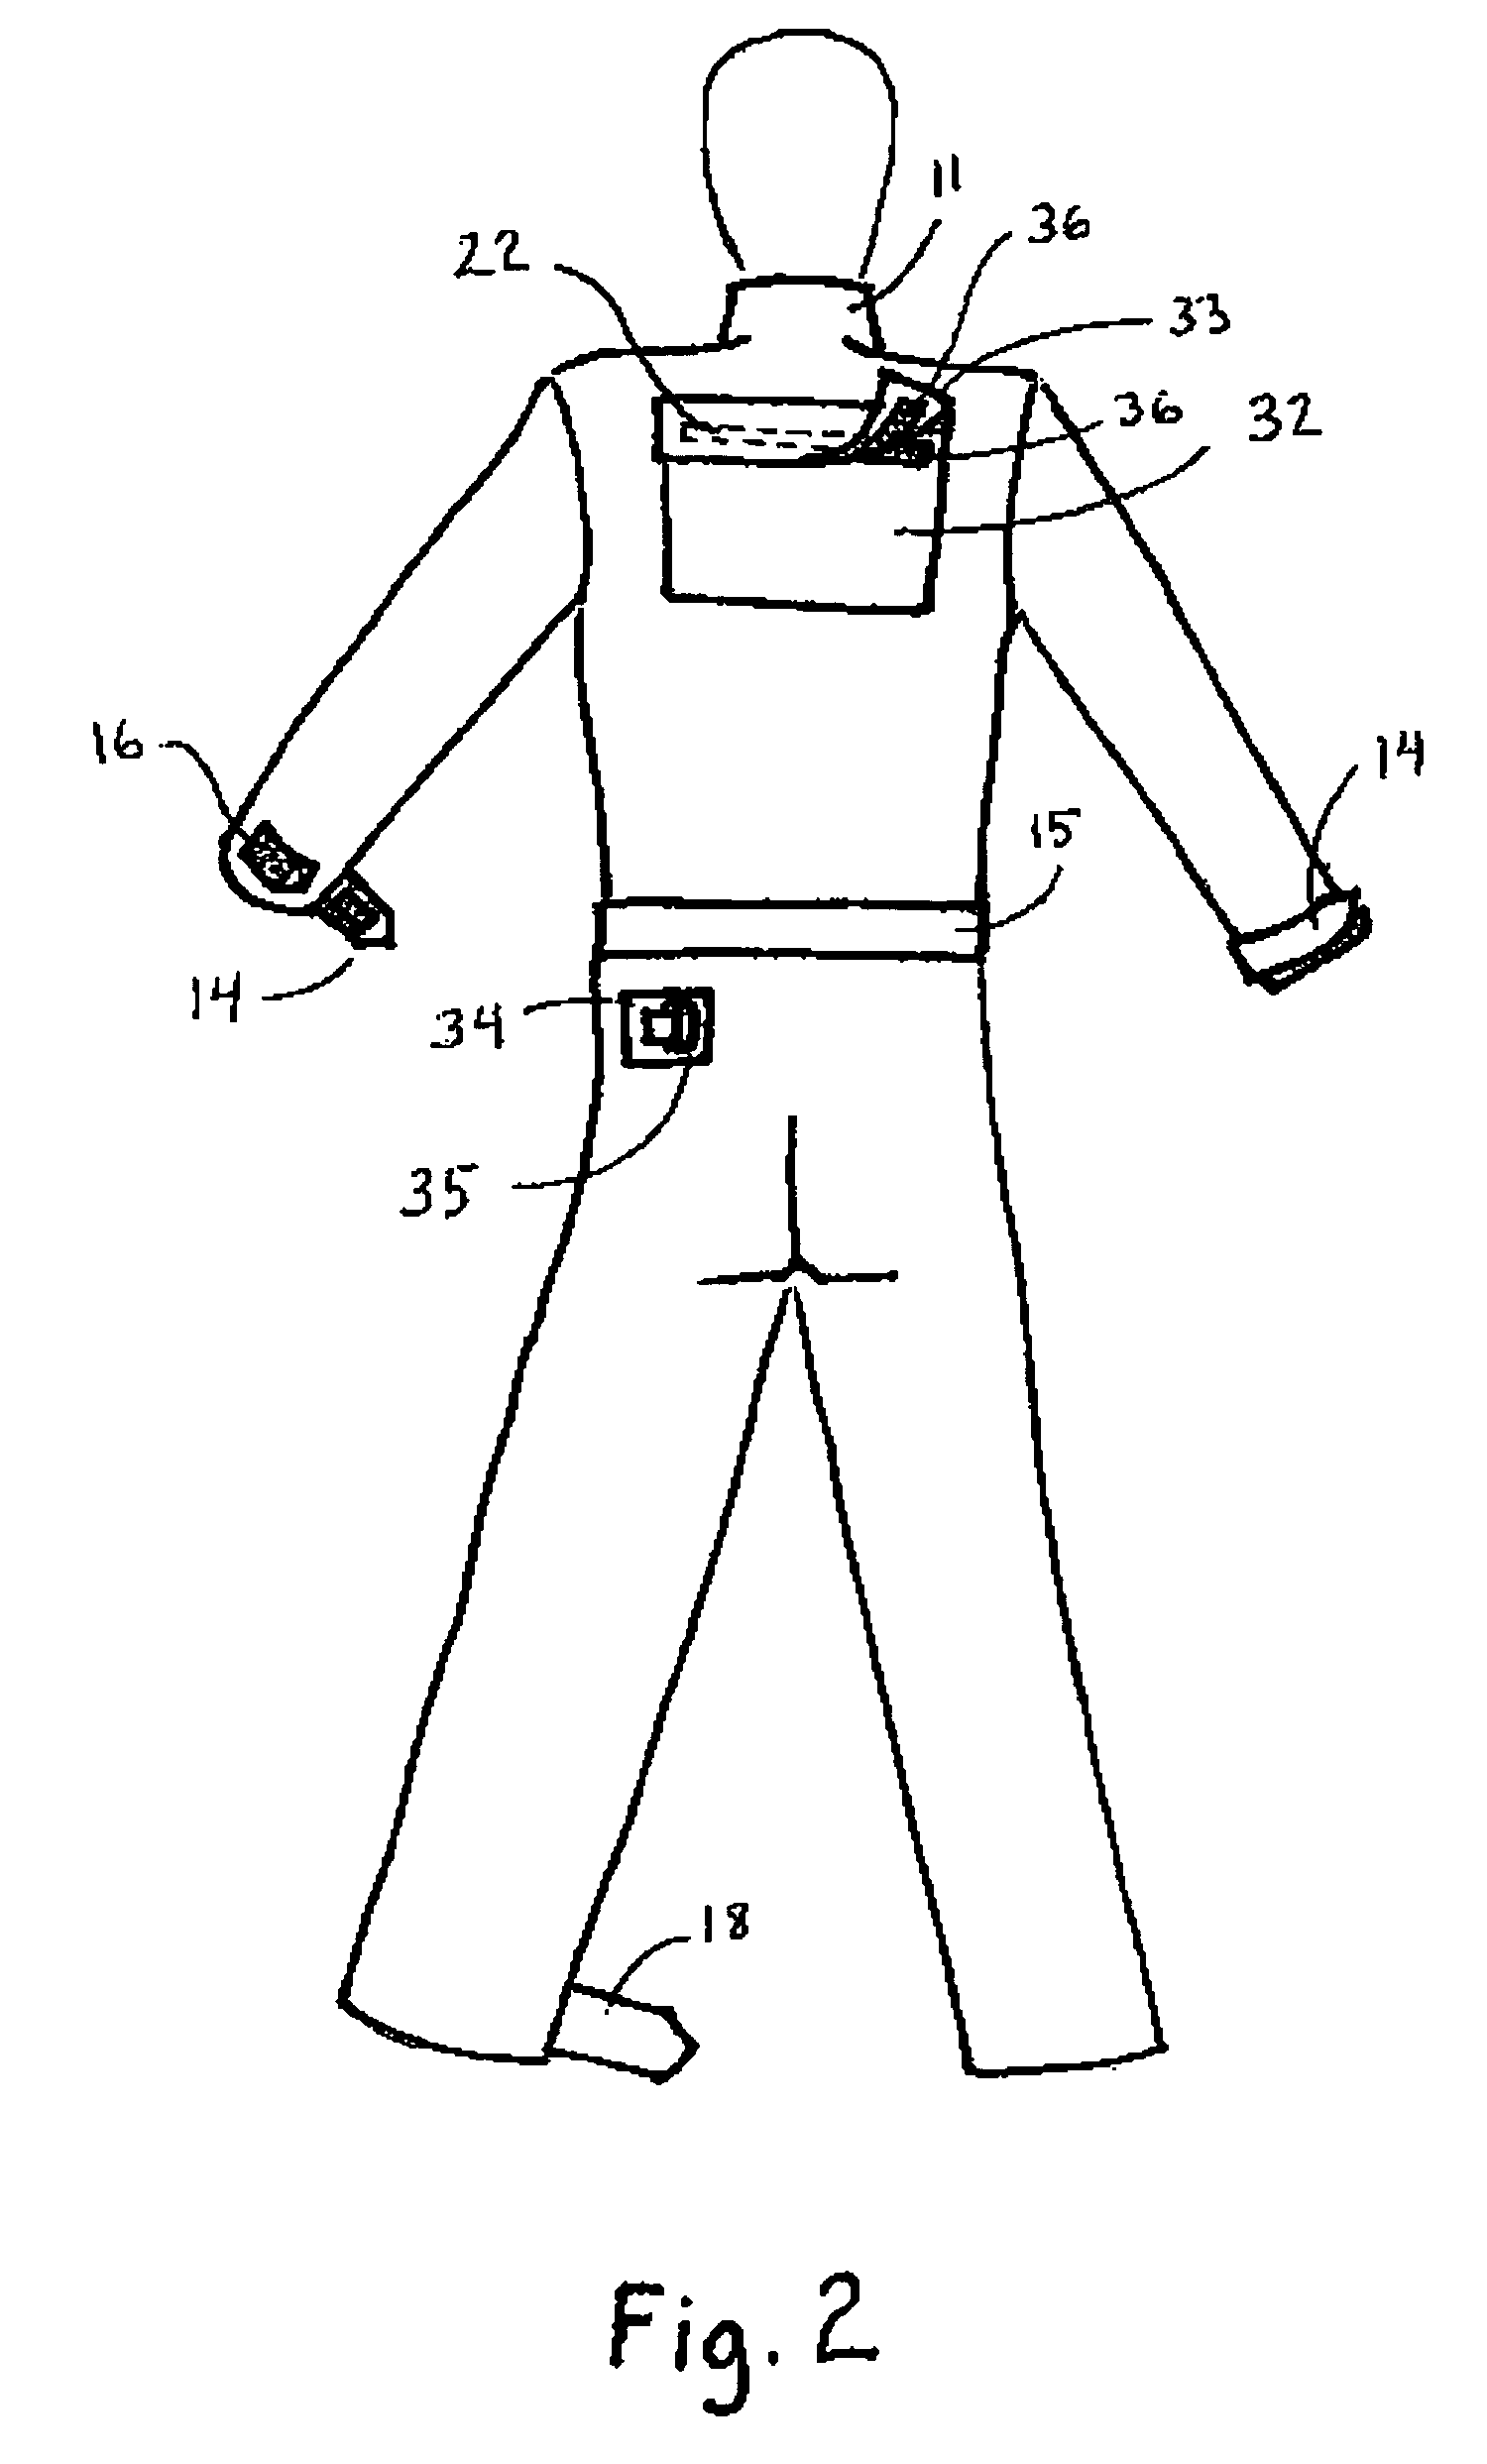 Explosion and fire extraction safety garment